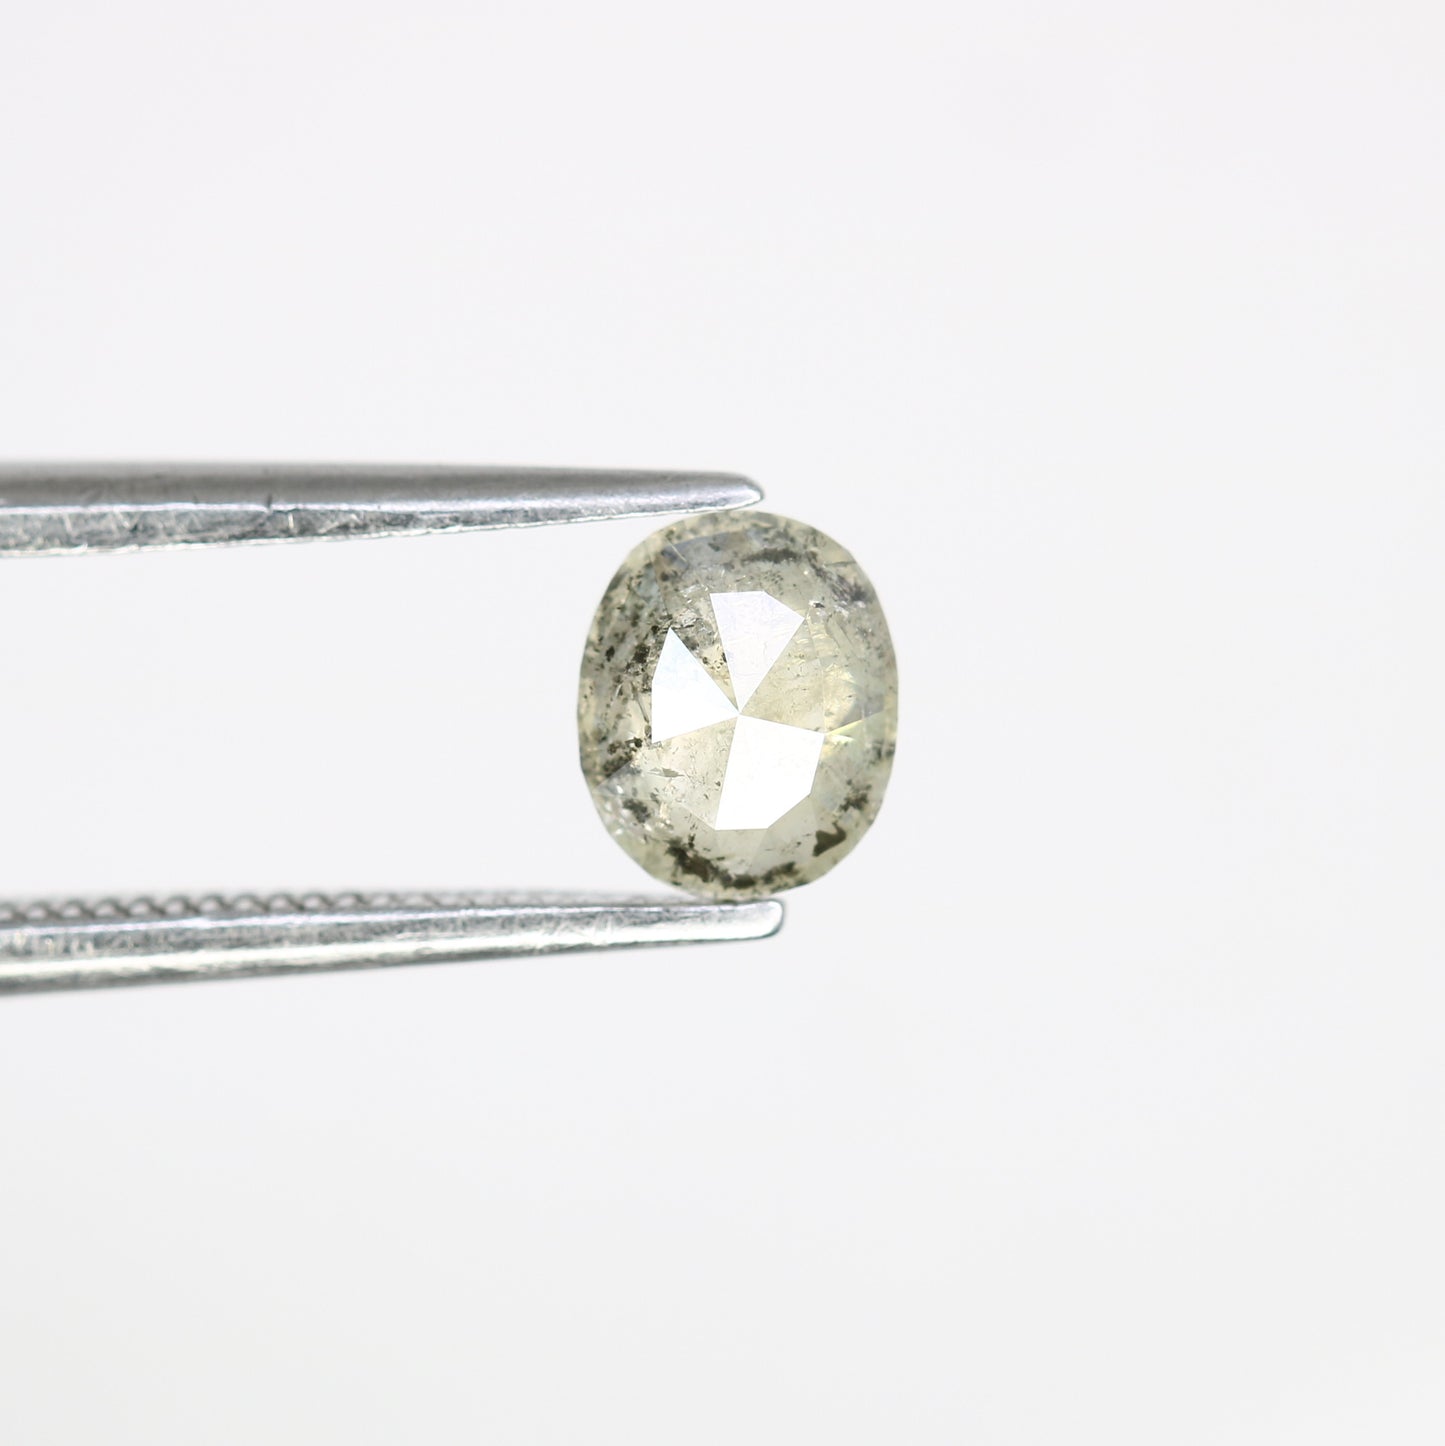 0.61 CT Salt And Pepper Oval Cut 5.80 MM Loose Diamond For Designer Jewelry